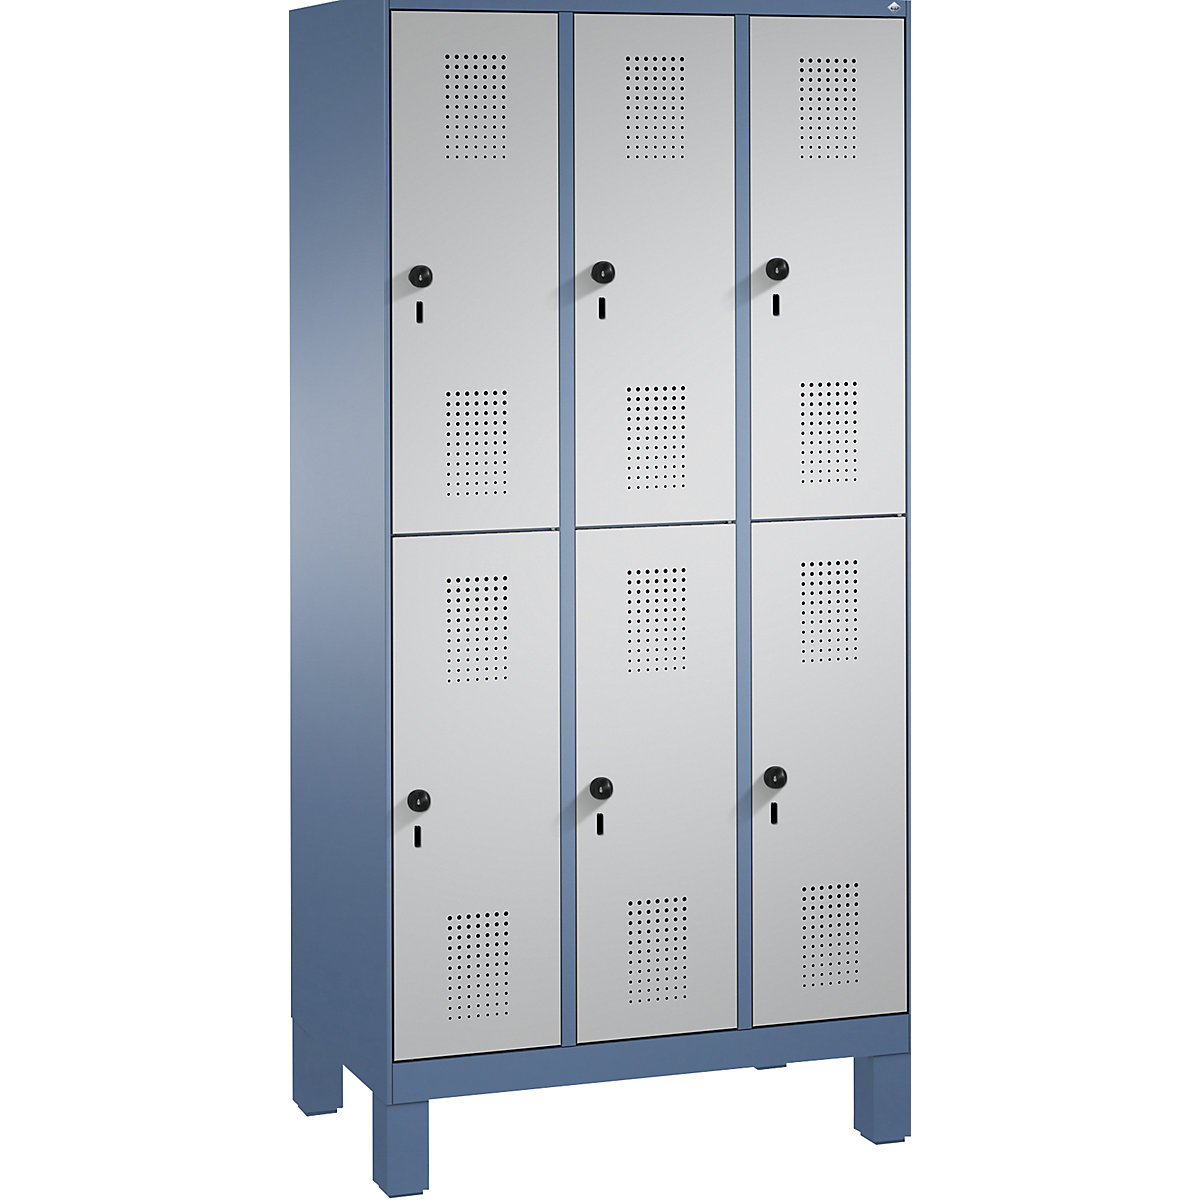 EVOLO cloakroom locker, double tier, with feet – C+P, 3 compartments, 2 shelf compartments each, compartment width 300 mm, distant blue / white aluminium-15